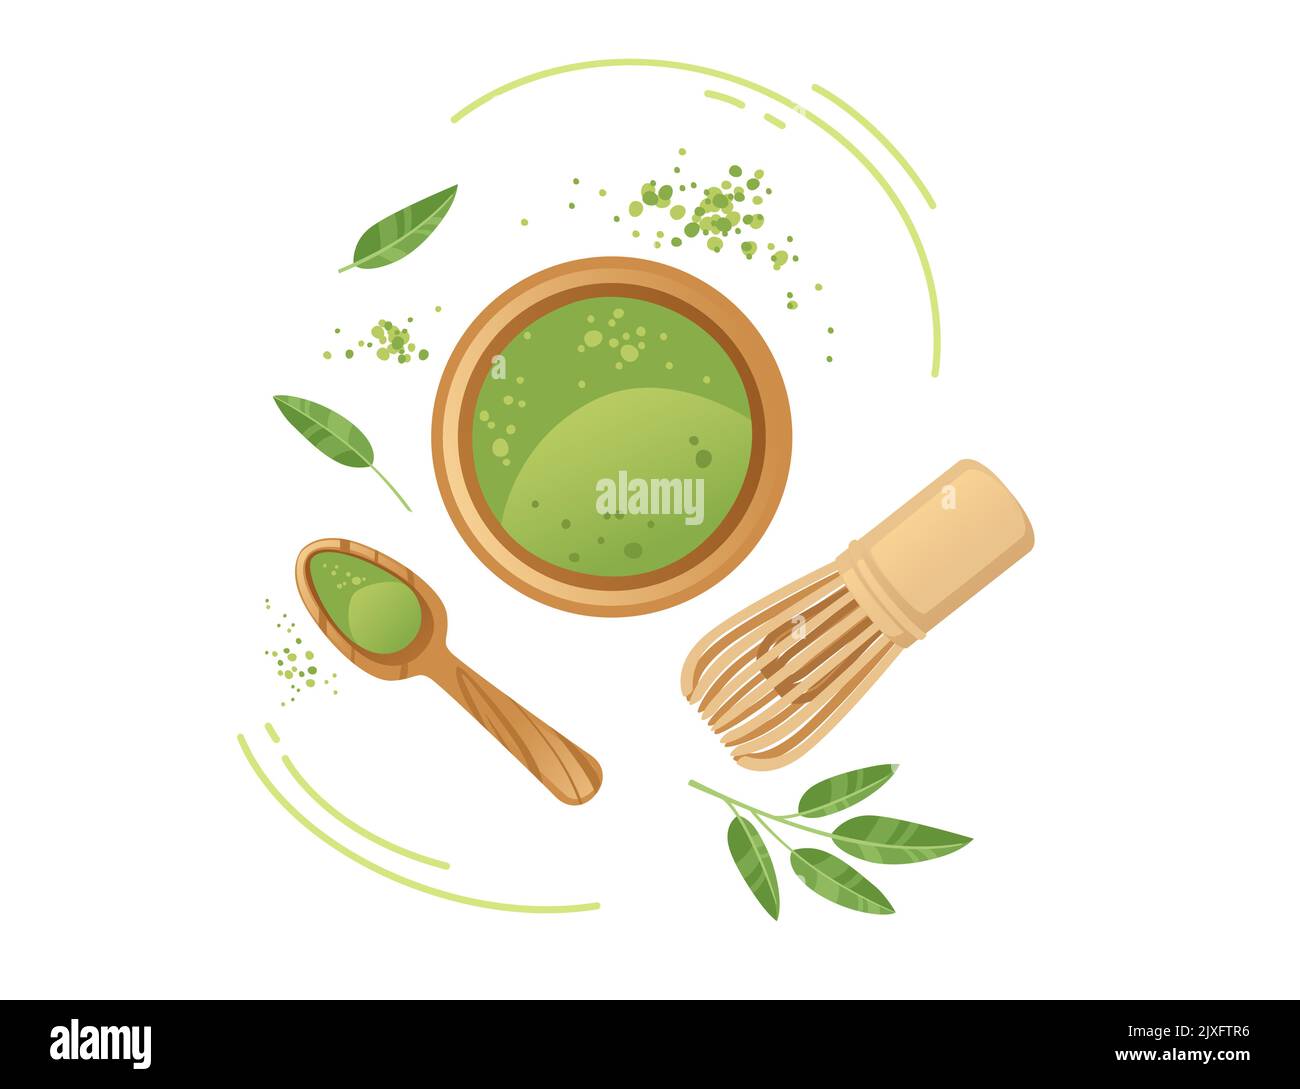 Matcha tea in cup with spoon vector illustration on white background Stock Vector